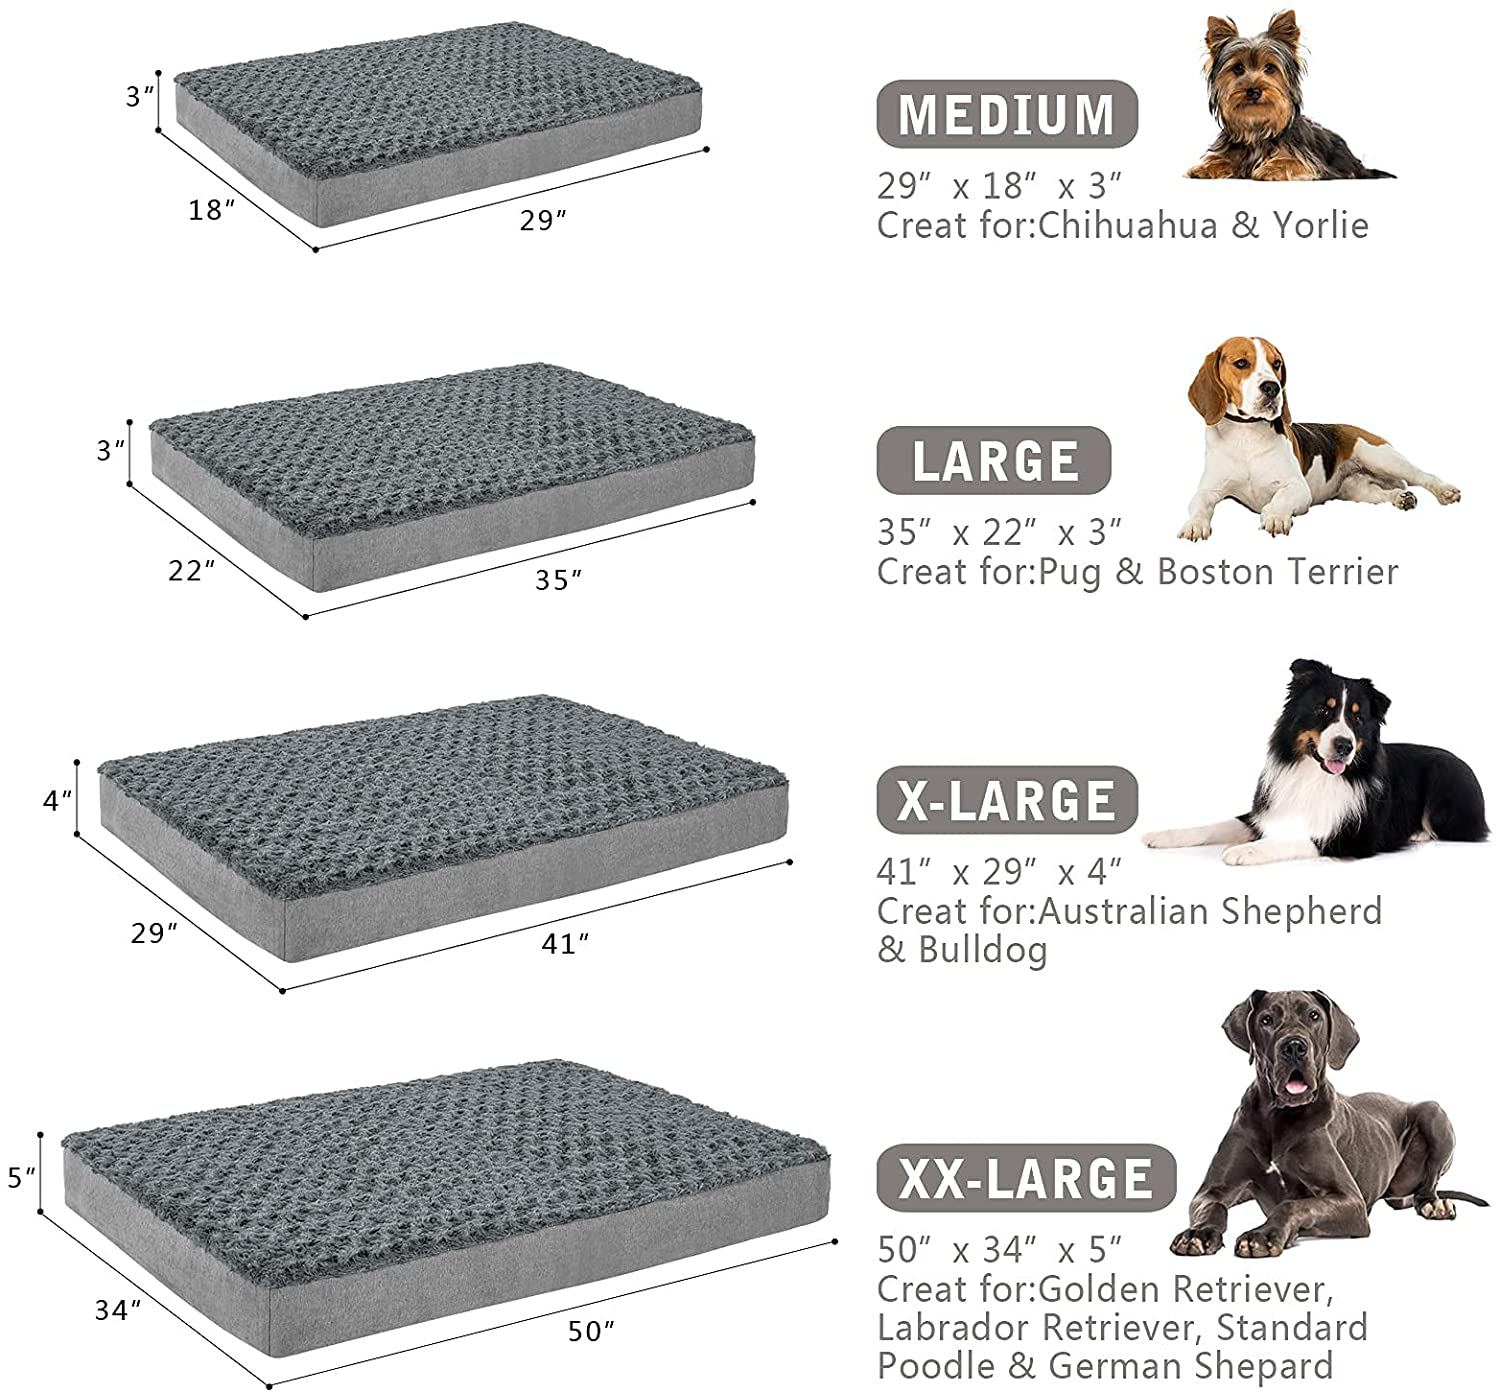 Petorrey Plush Memory Foam Orthopedic Dog Bed for Medium, Large Dogs with Cooling Gel, Washable Dog Crate Mat, Removable Cover & Waterproof Lining